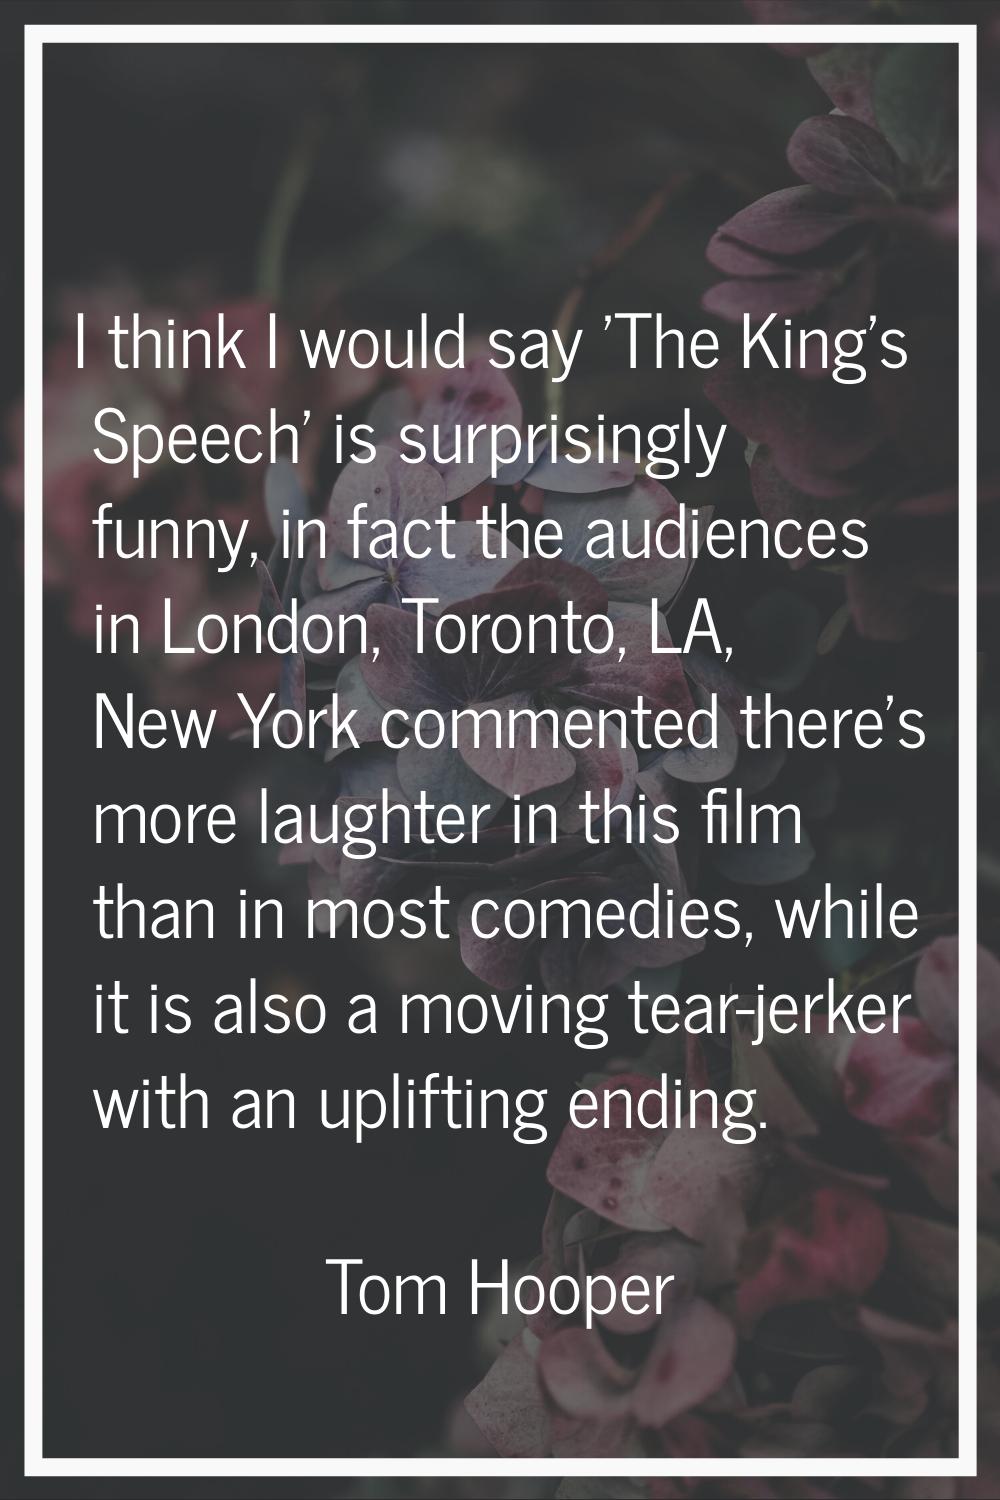 I think I would say 'The King's Speech' is surprisingly funny, in fact the audiences in London, Tor